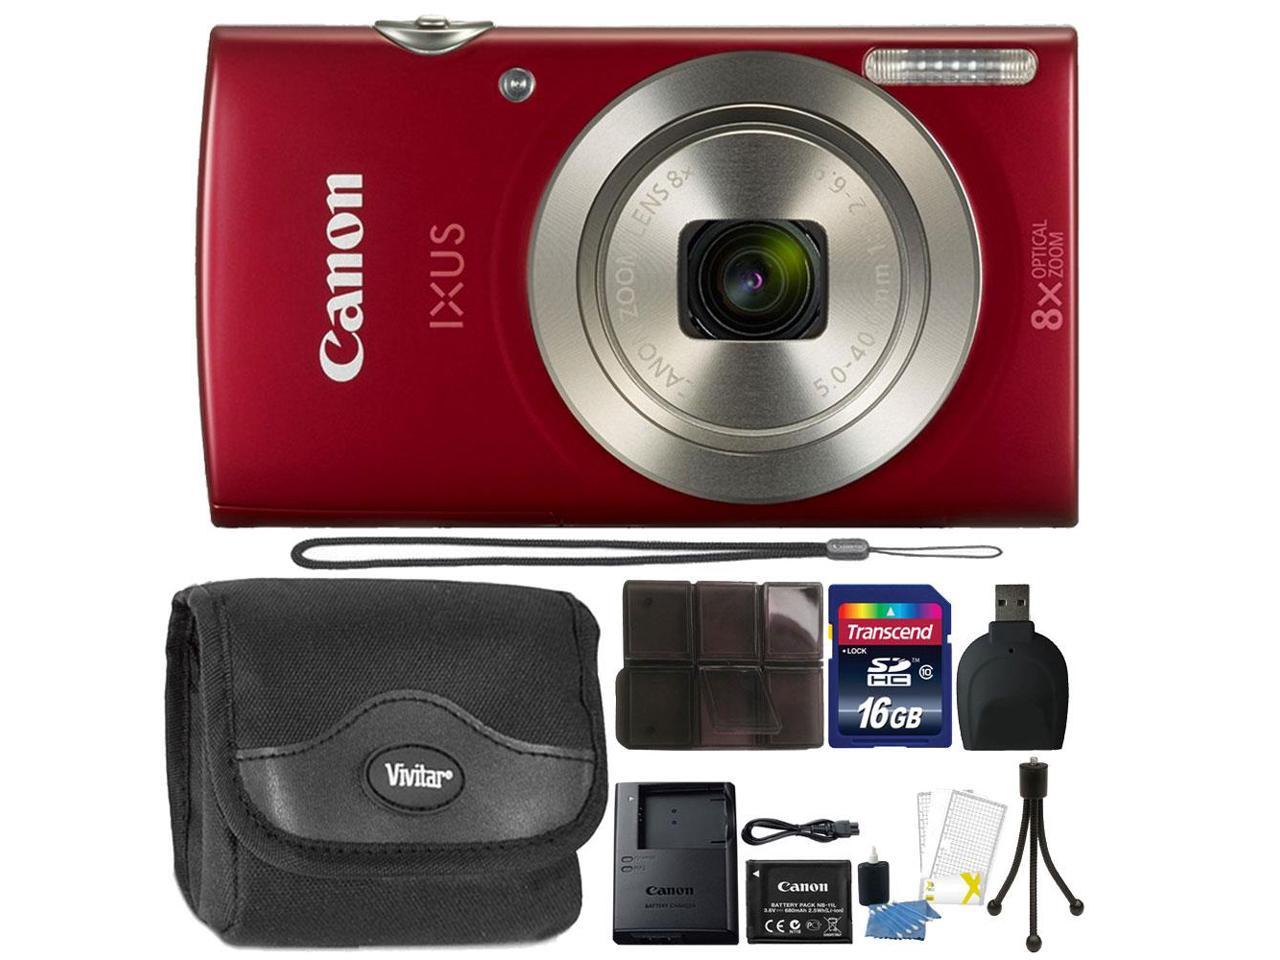 Canon IXUS 185 20.0 MP Compact Digital Camera Red + 16GB Memory Card + Wallet + Reader + Case + 3pc Cleaning Kit + Mini Tripod